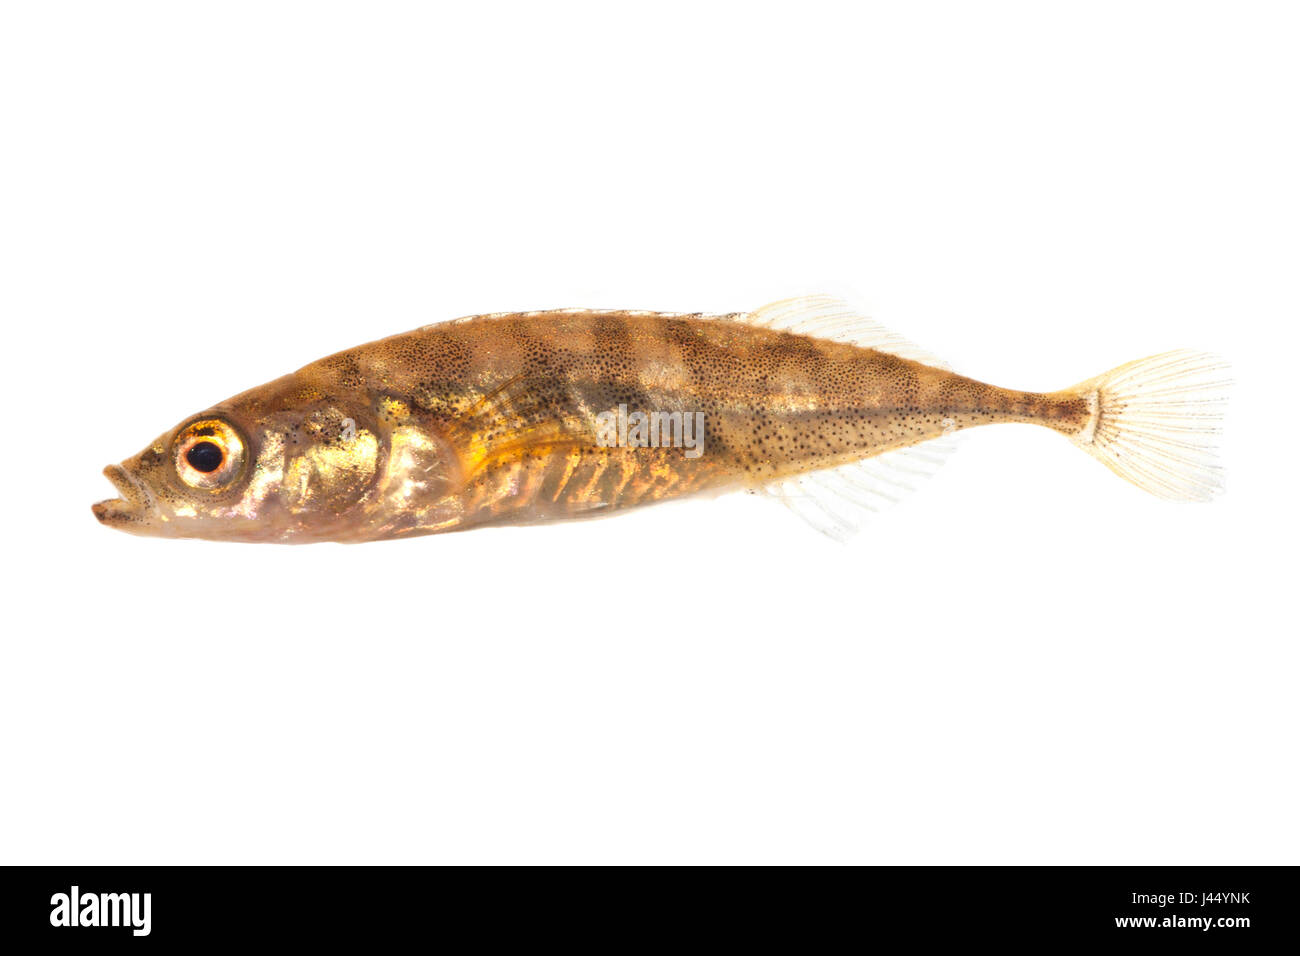 photo of a female tenspined stickleback against a white background Stock Photo